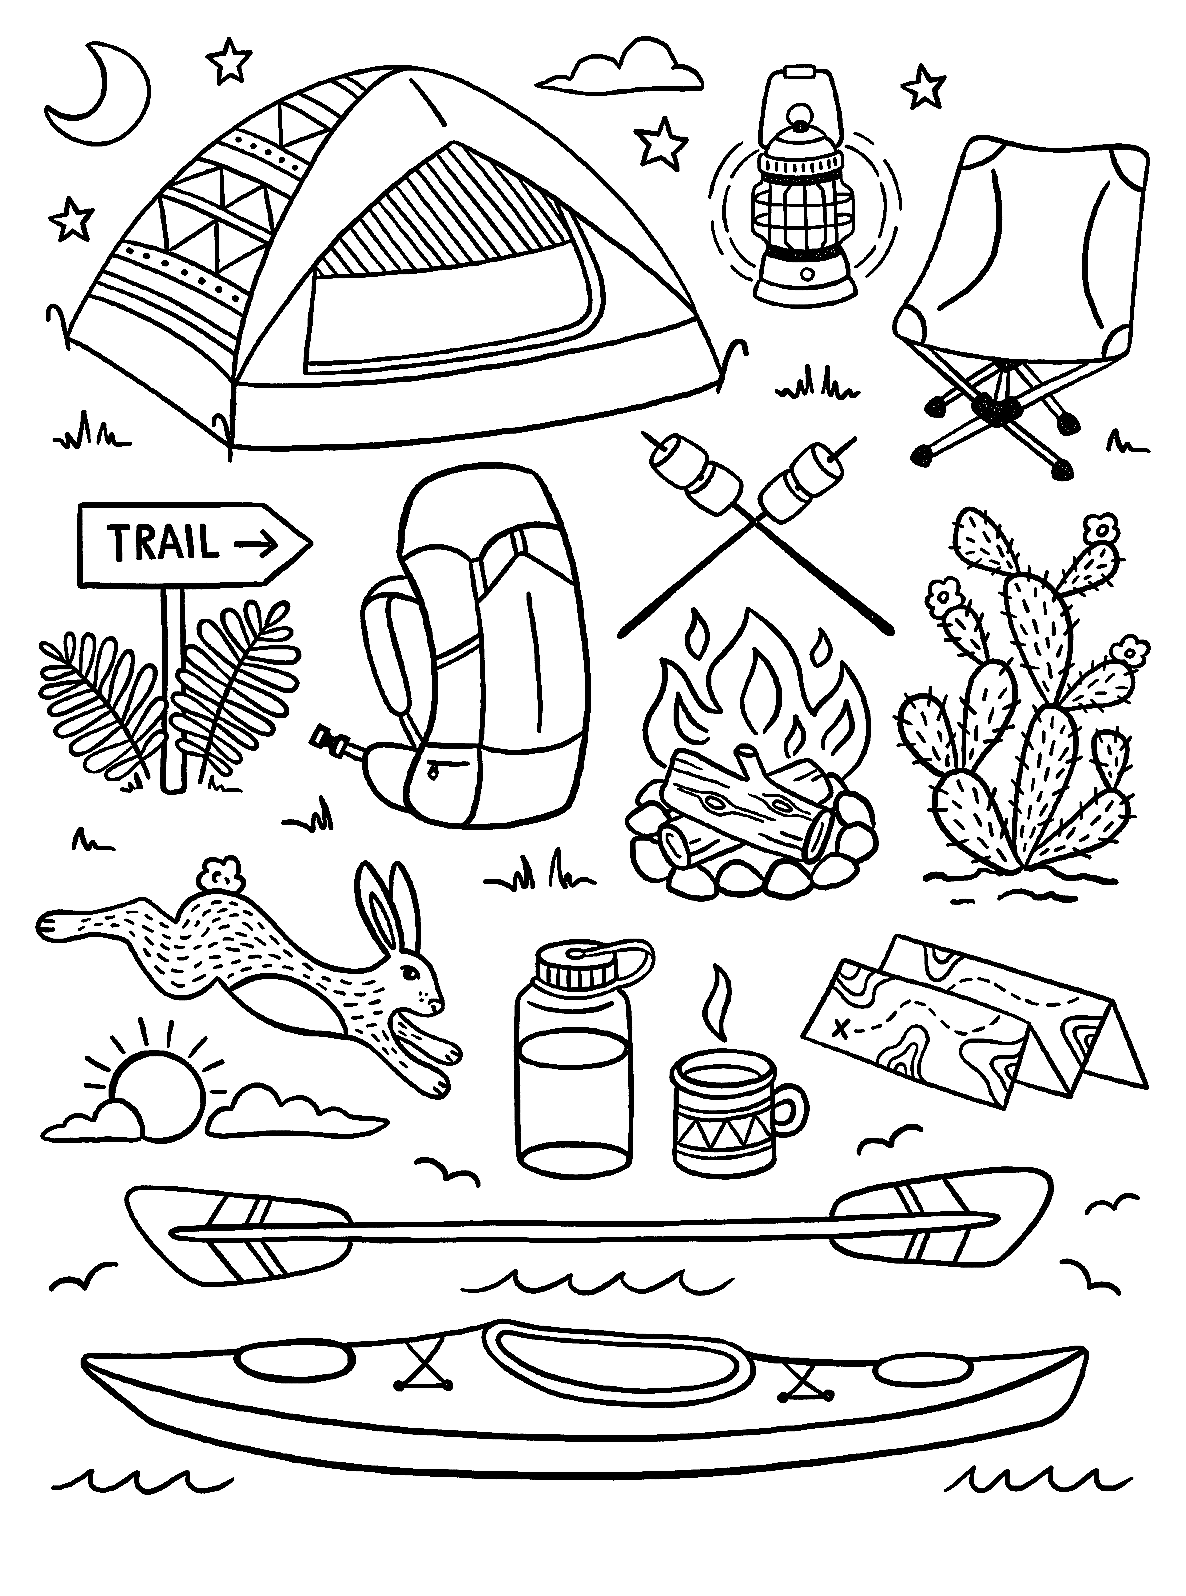 Summer Camping Coloring Page